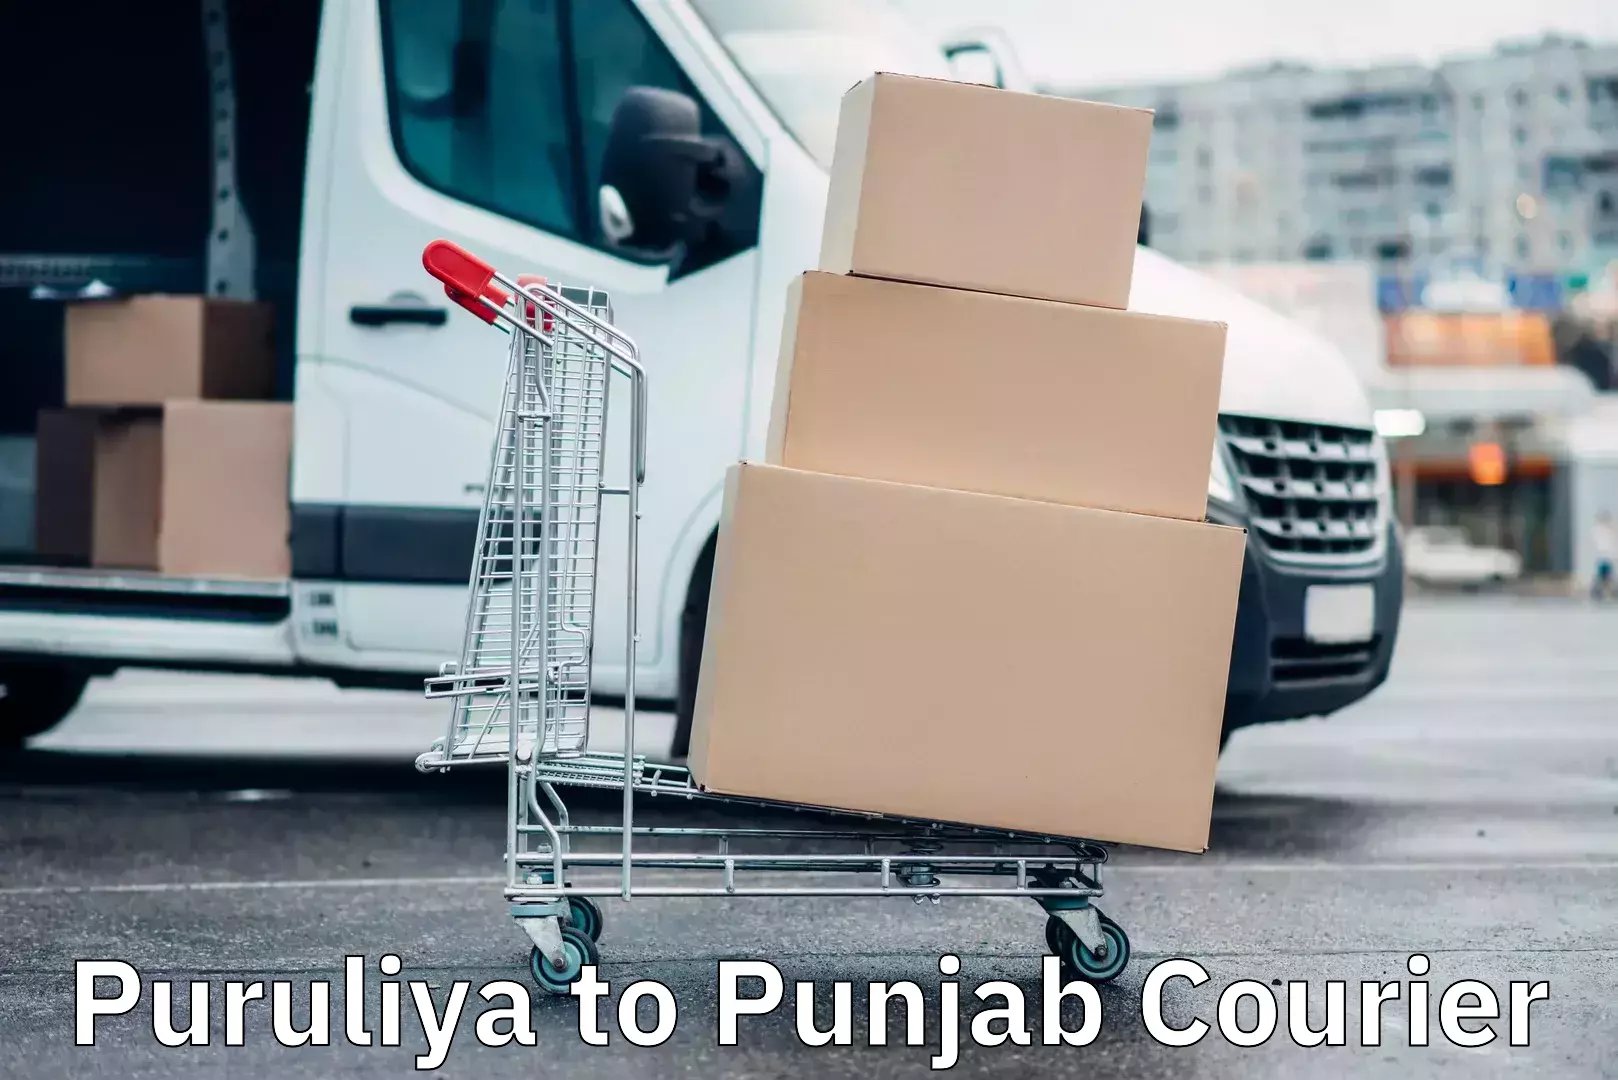 Sustainable courier practices Puruliya to Punjab